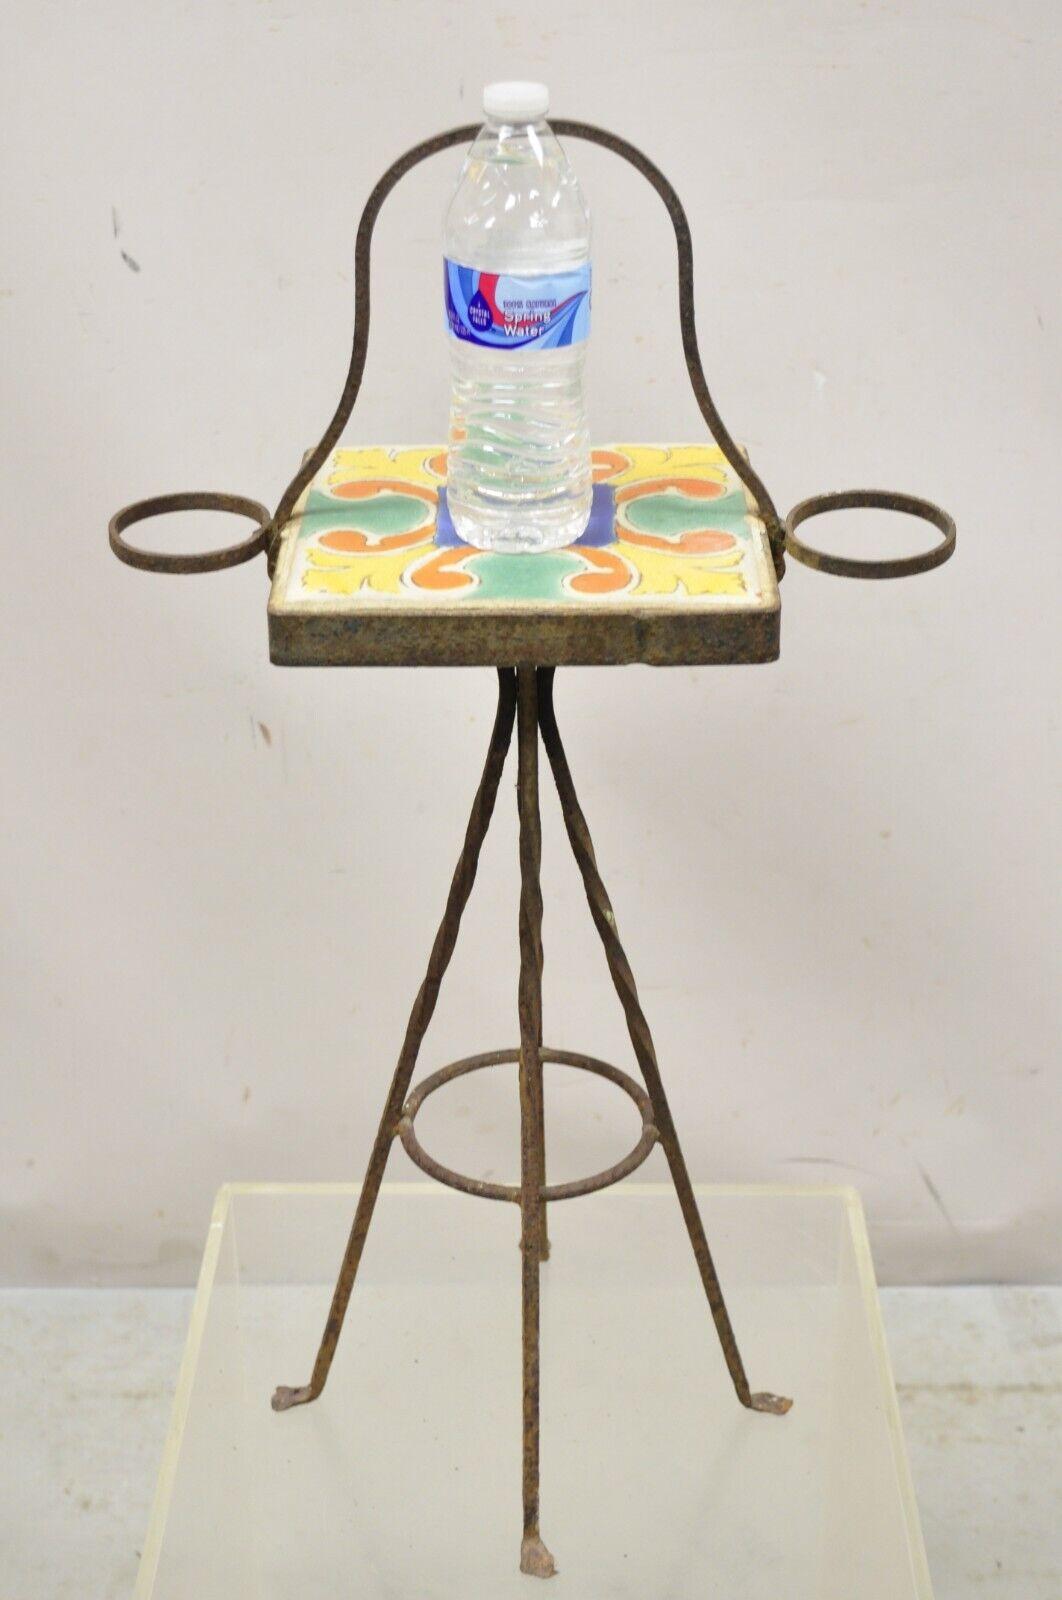 Antique Catalina California Arts & Crafts Tile Smoke Stand Small Side Table. Item features a wrought iron base, single square Arts & Crafts tile, wonderful yellow, blue, green, orange color, distressed finish, very nice antique item. Circa